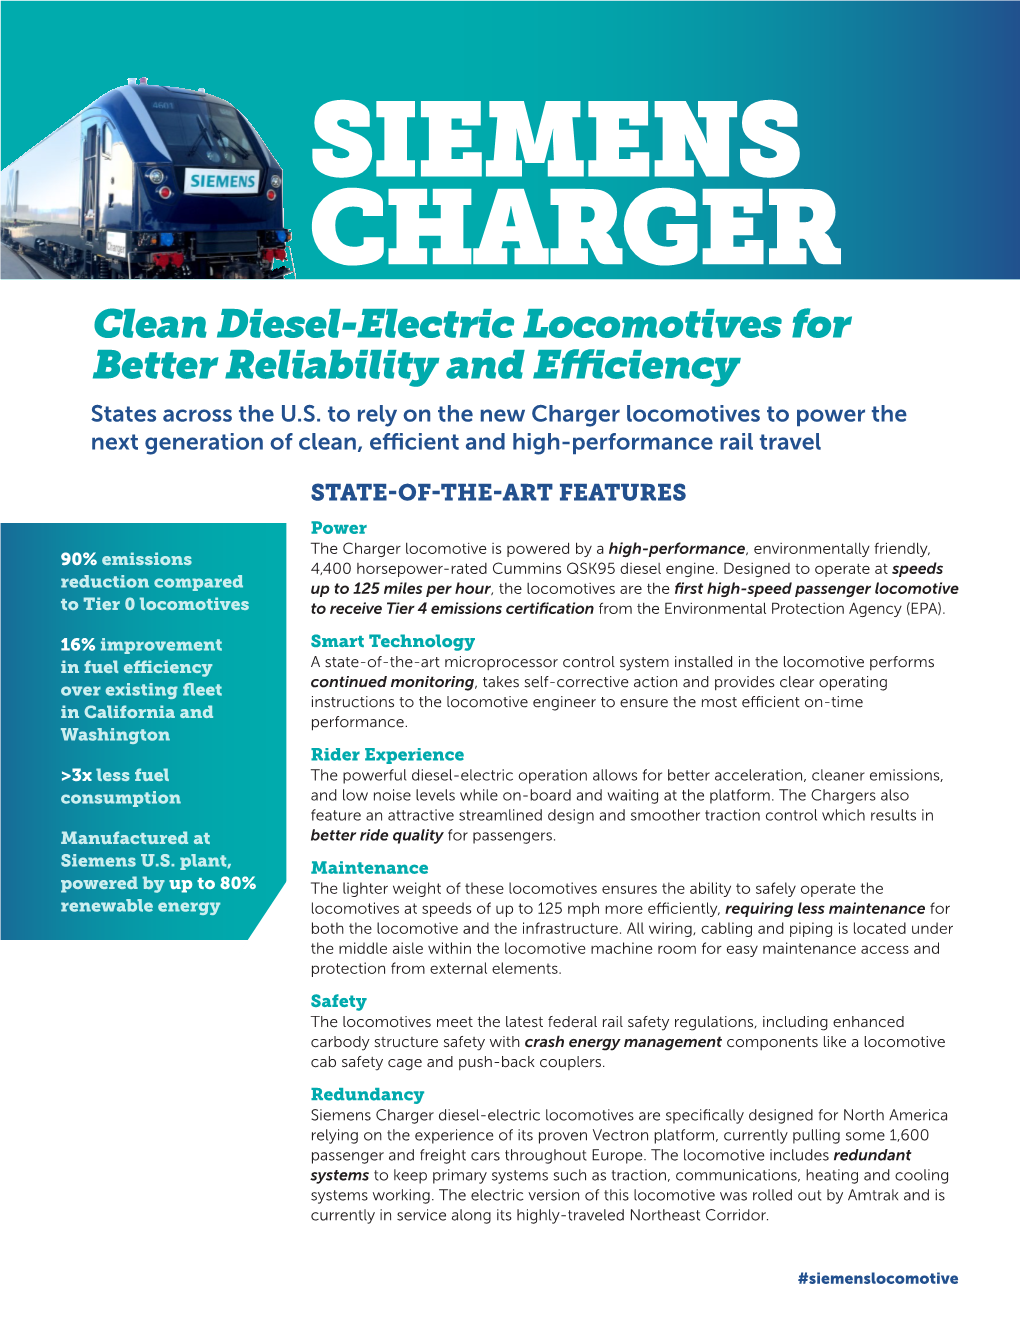 SIEMENS CHARGER Clean Diesel-Electric Locomotives for Better Reliability and Efficiency States Across the U.S